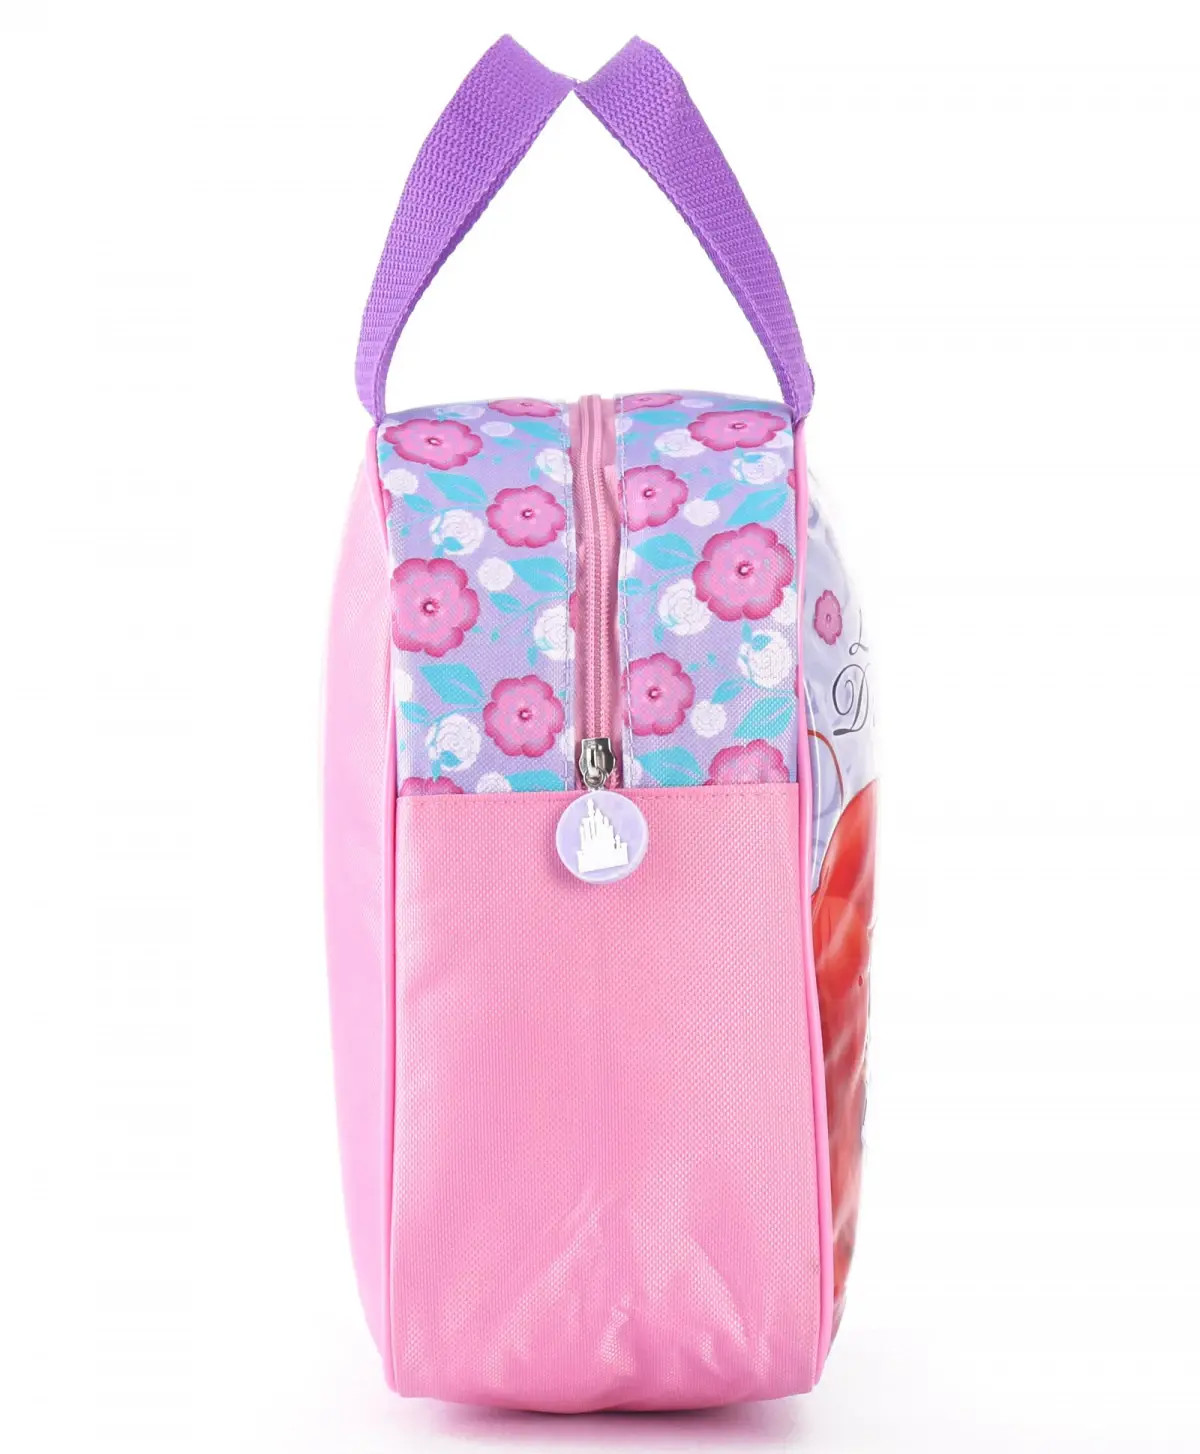 Striders Princess Lunch Bag ??? Adorable Insulated Lunch Tote with Sparkling Design, 3Y+, Multicolour